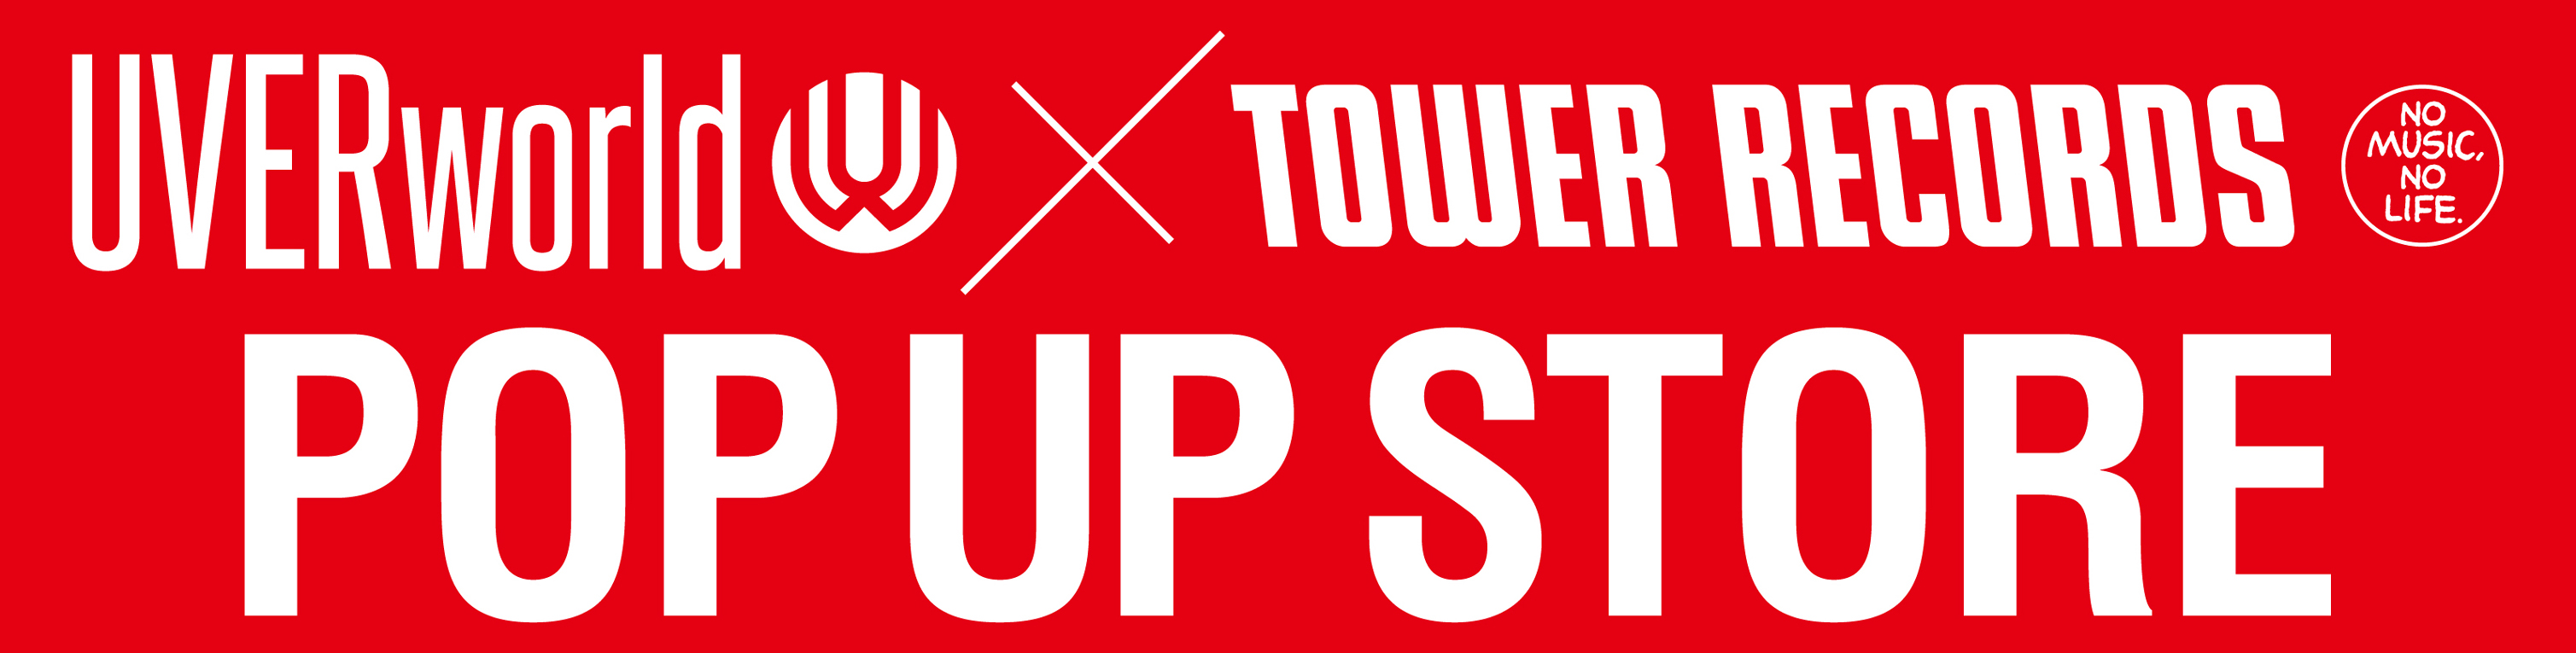 Uverworld Tower Records Pop Up Store が109men Sに期間限定オープン Tower Records Online